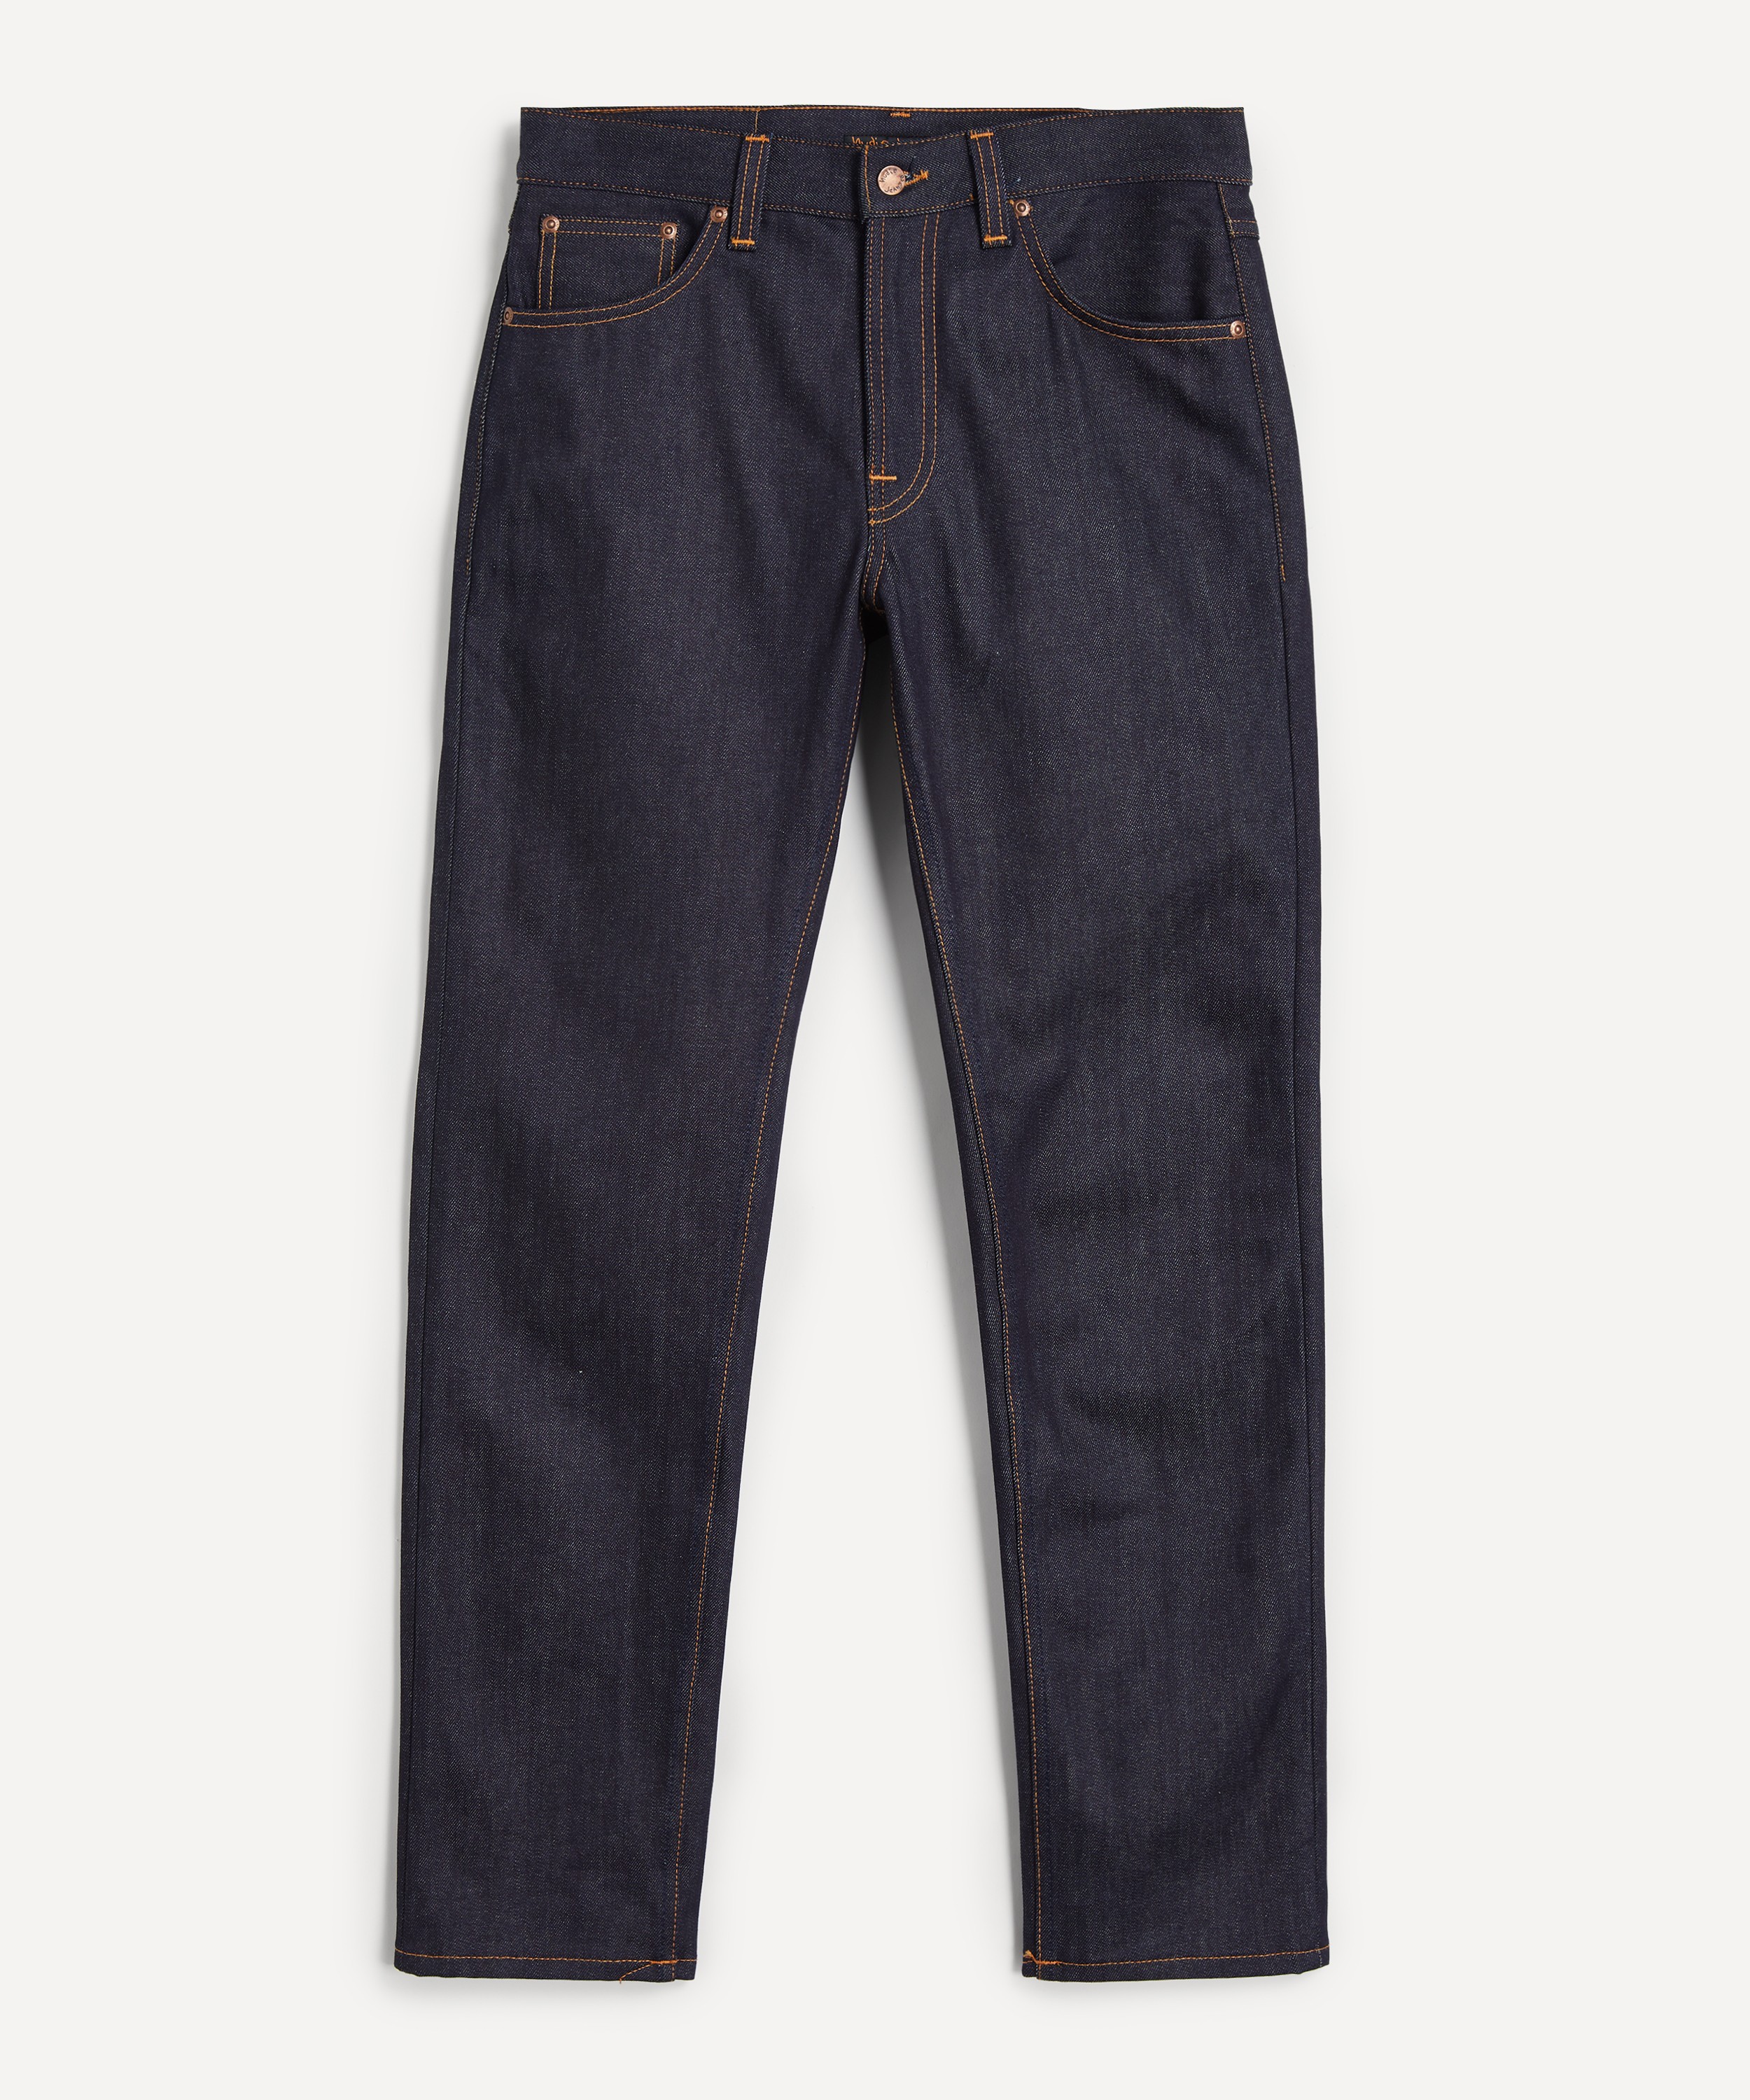 Nudie Jeans - Gritty Jackson Jeans